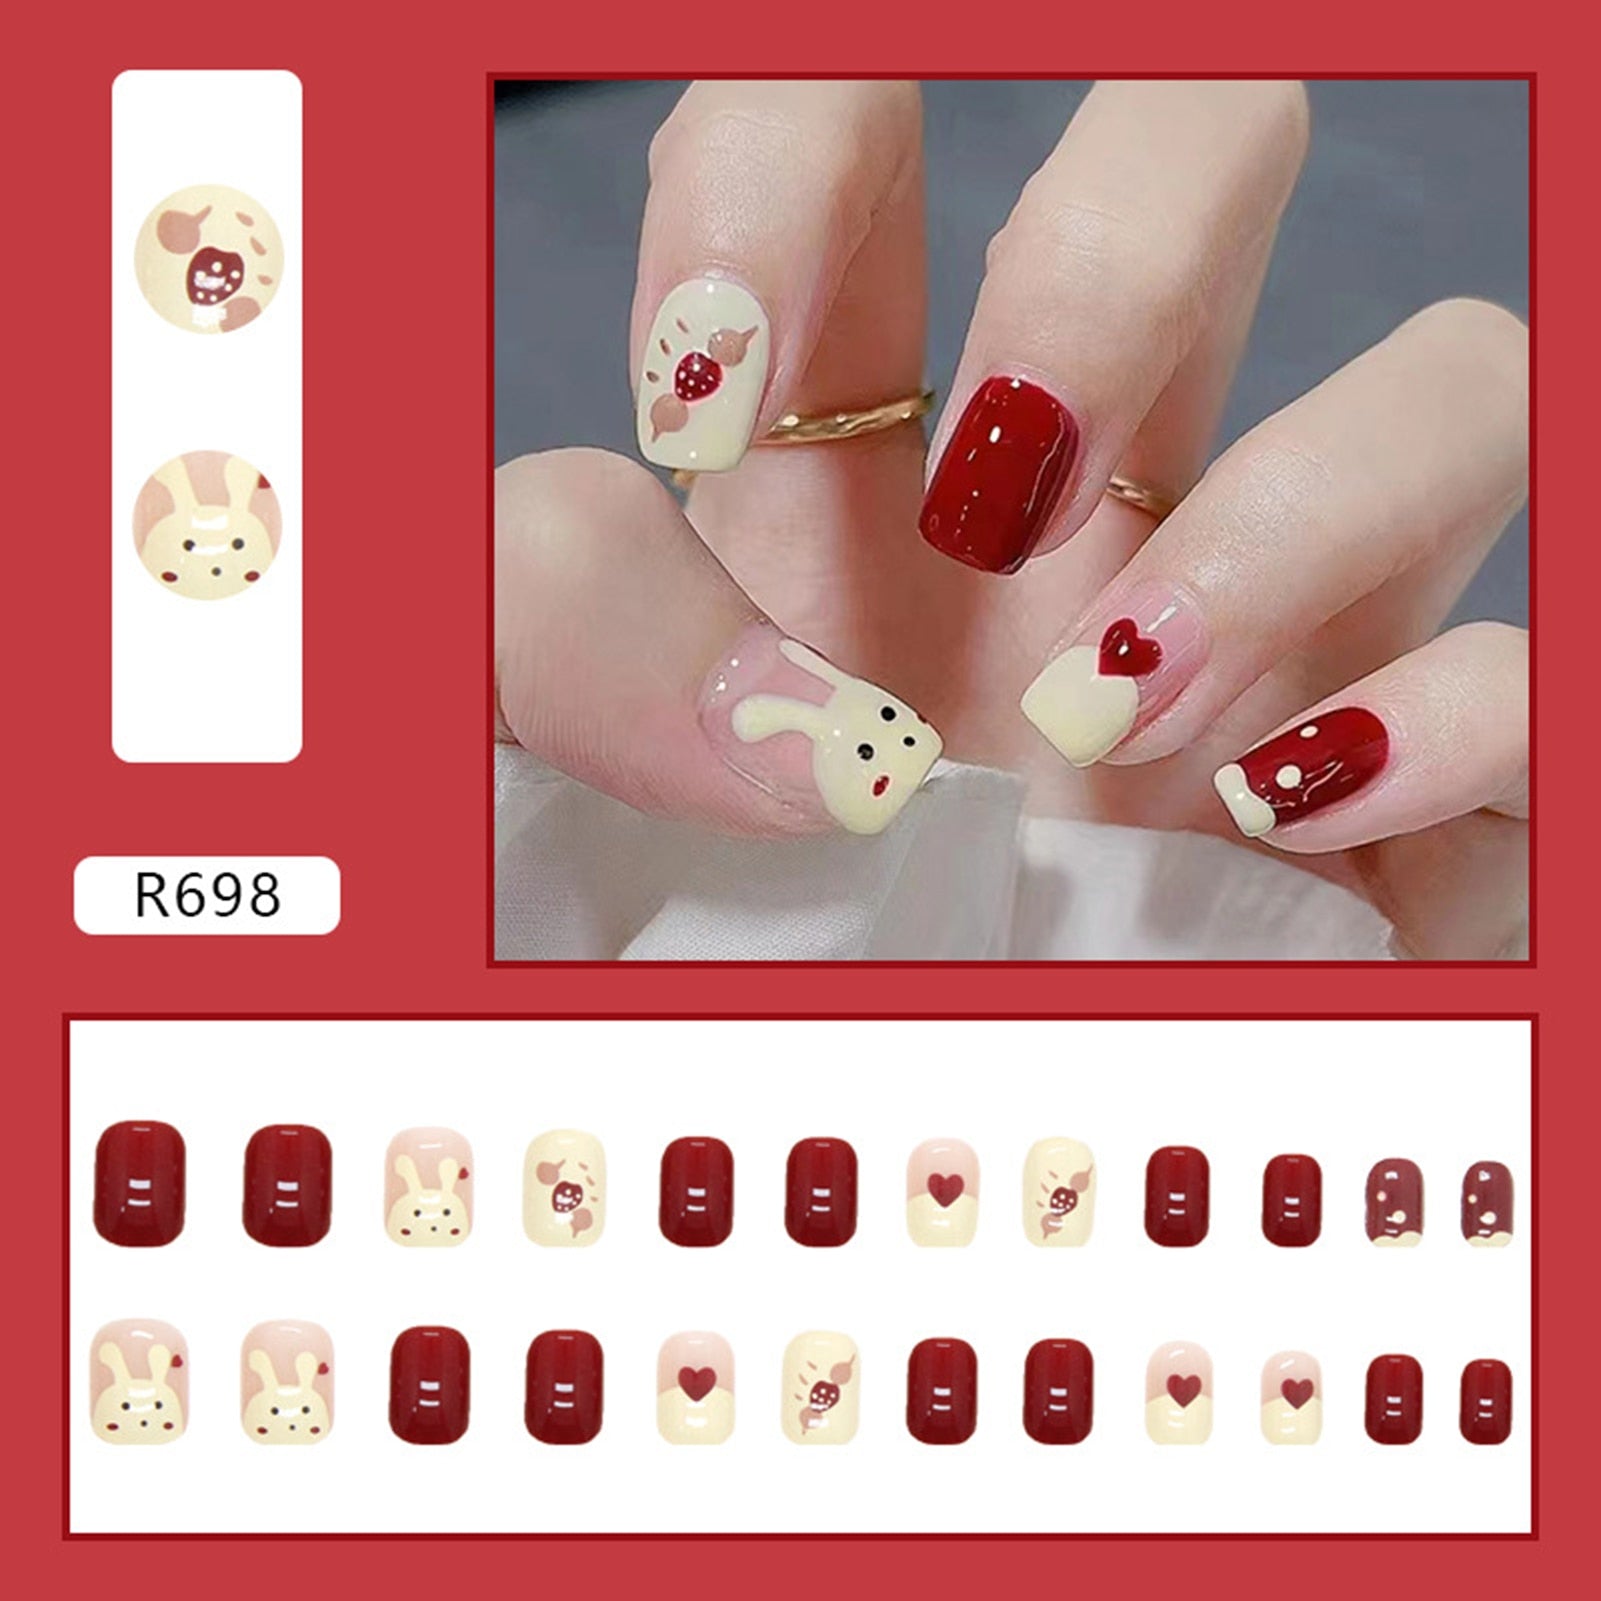 Flytonn 24pcs Long Almond Shape Rococo Style Fake y2k Nails With Cute Rabbit Designs Wearable False Nails Press On Manicure Nail Tips